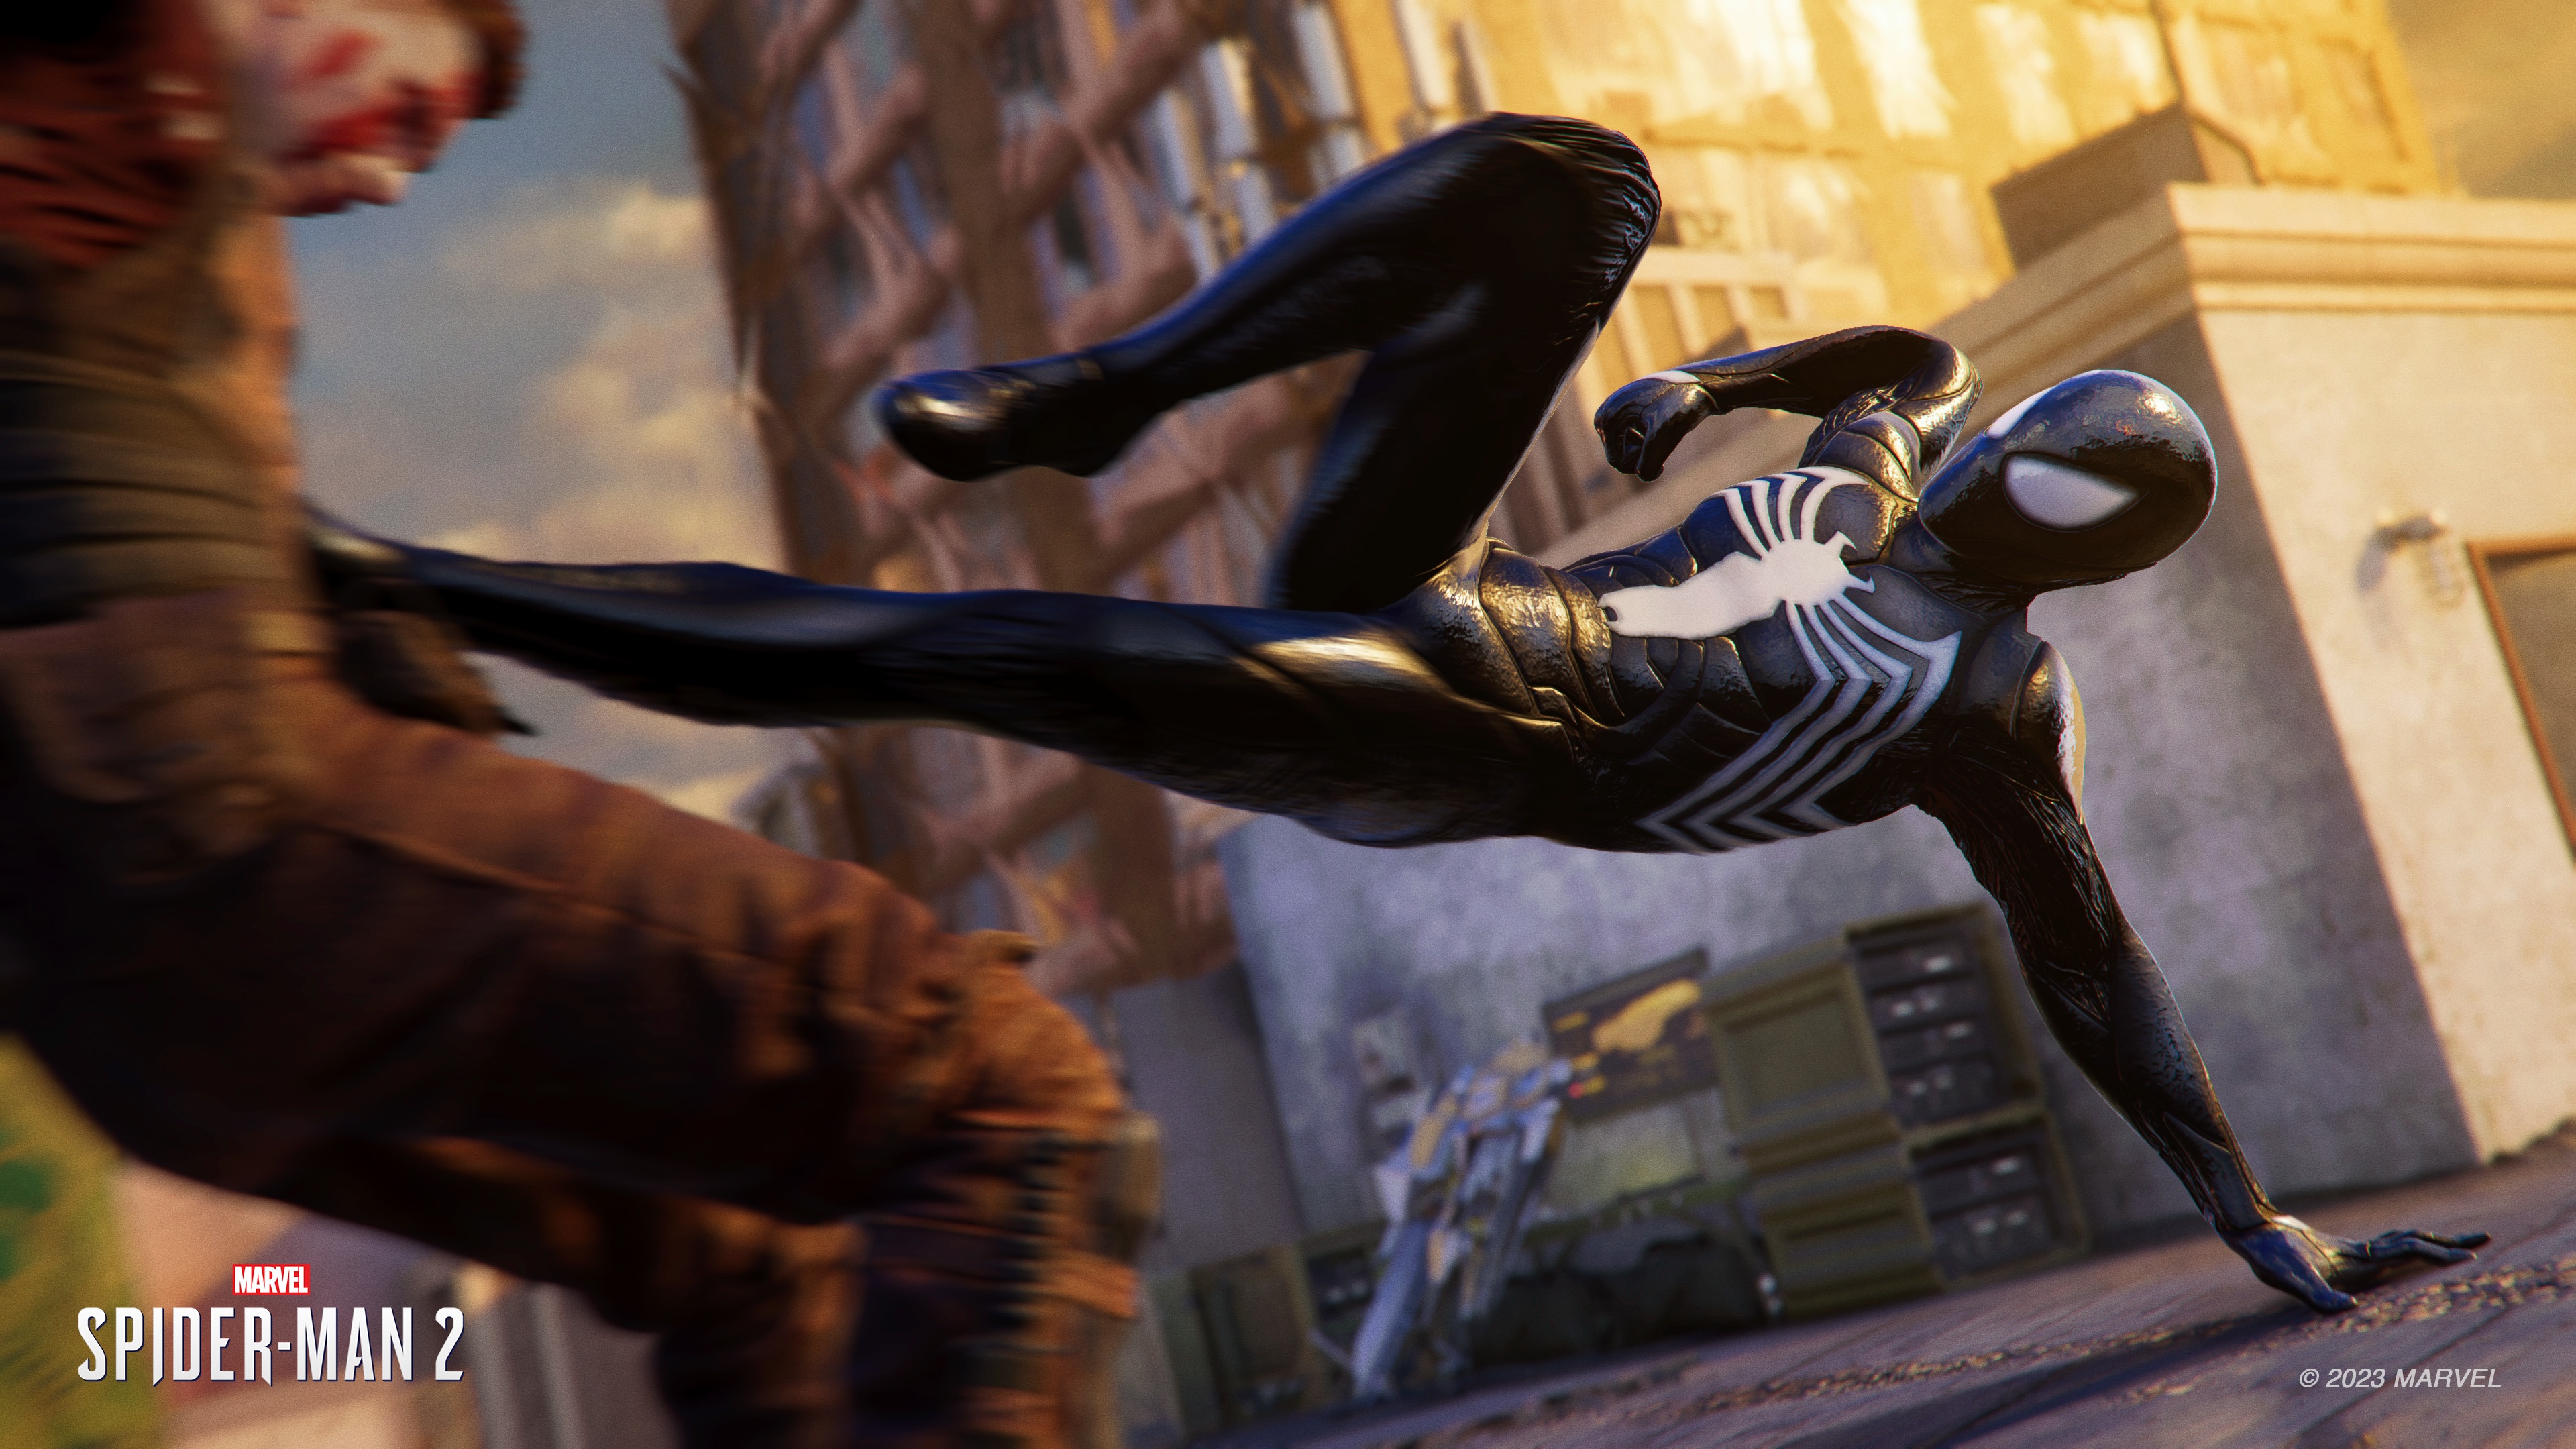 (Via the skill tree, Spider Men unlock new attacks, such as this kicking sequence.)